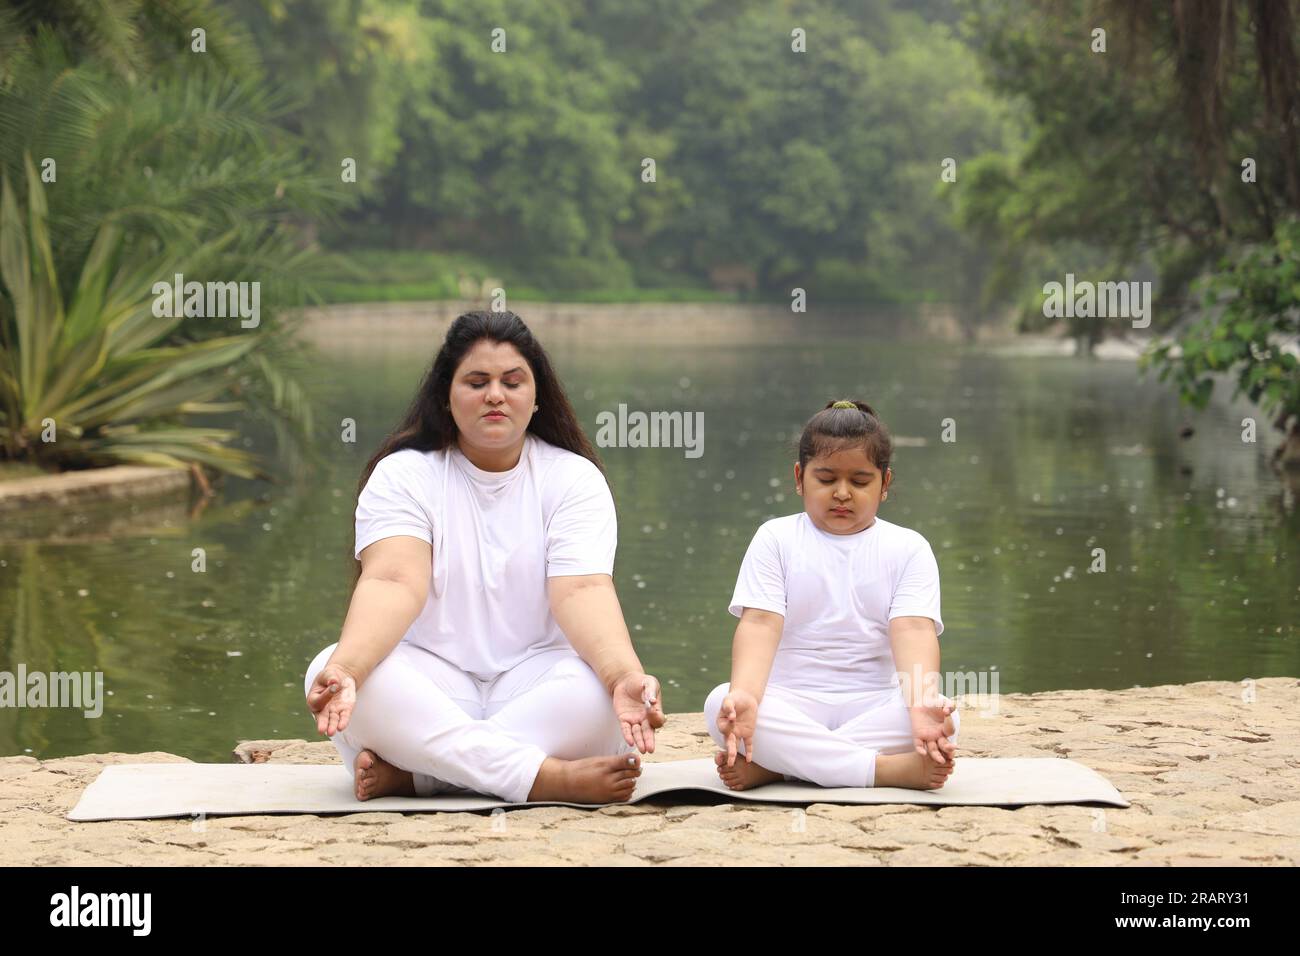 Obese family exercising and doing Yoga poses in green serene environment early morning in park to maintain healthy lifestyle. International yoga day. Stock Photo